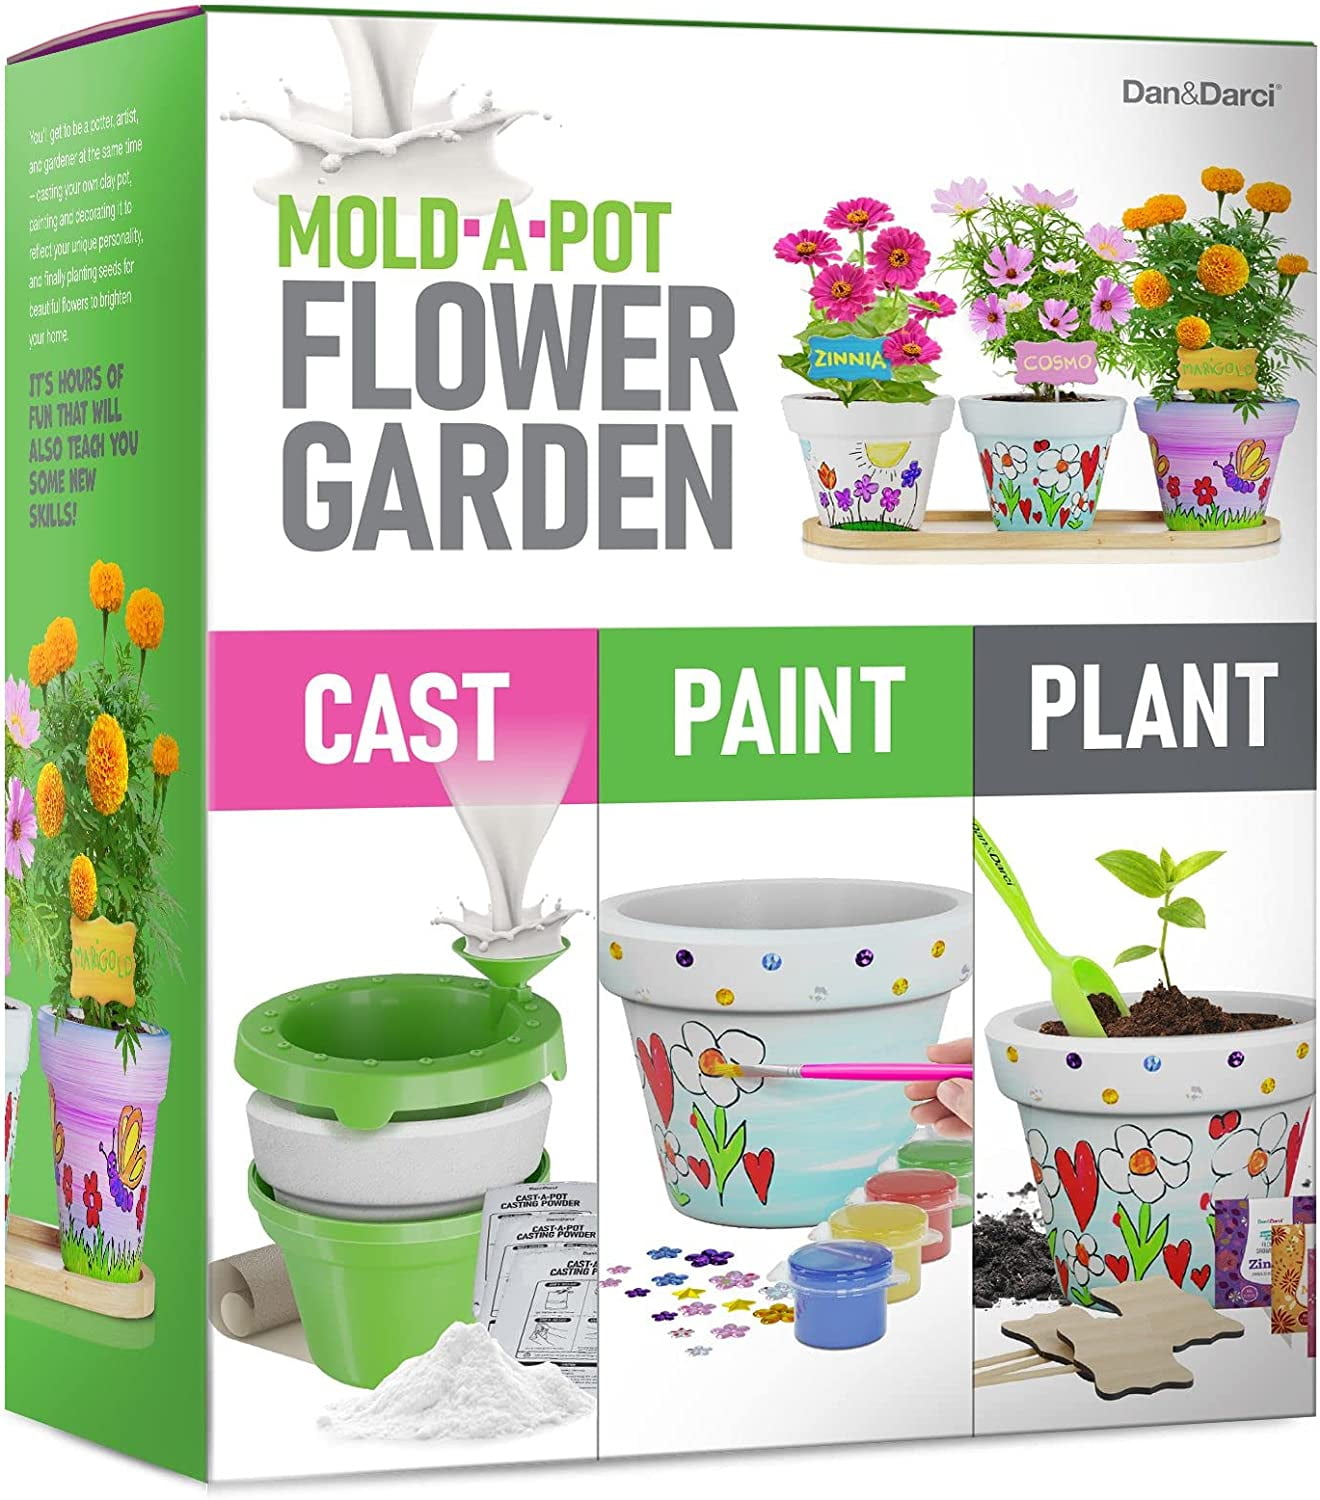 Cast, Paint & Plant Kit for Kids & Teens - Birthday Gift Ideas for Girls & Boys Age 8-14 Year Old Tween Girl Christmas - STEM Teenage Crafts Gifts Kits, Fun DIY Art Teen Projects - Casting & Gardening